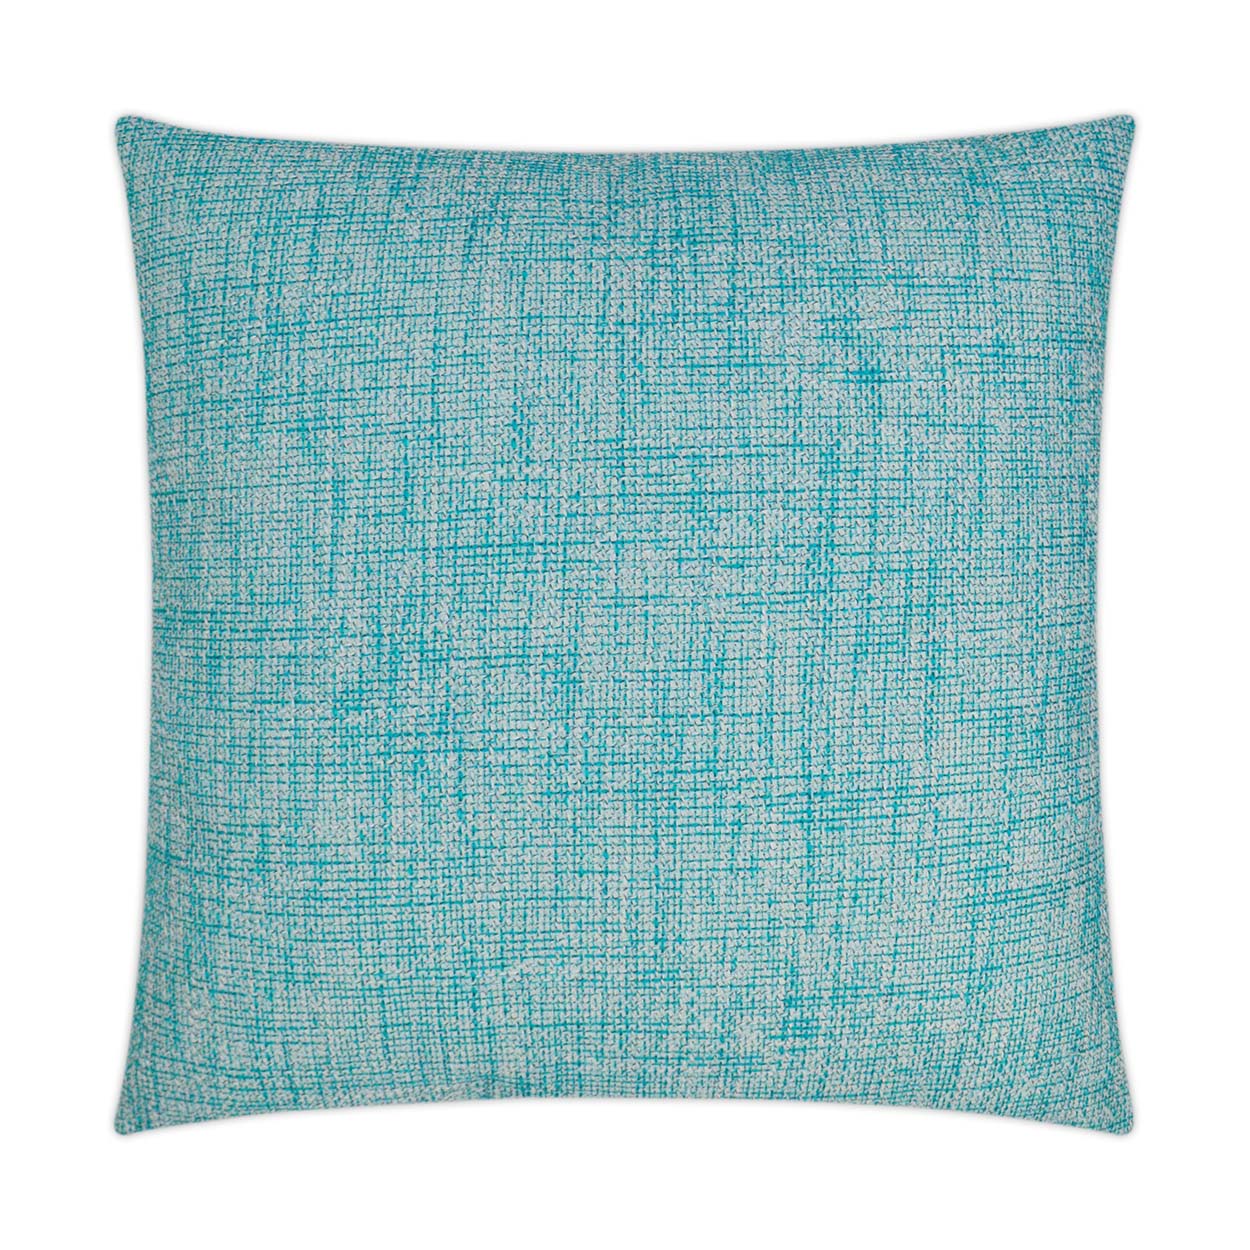 Luxury Outdoor Pillow - 22" x 22" - Double Trouble - Turquoise; Sunbrella, or equivalent, fabric with fiber fill